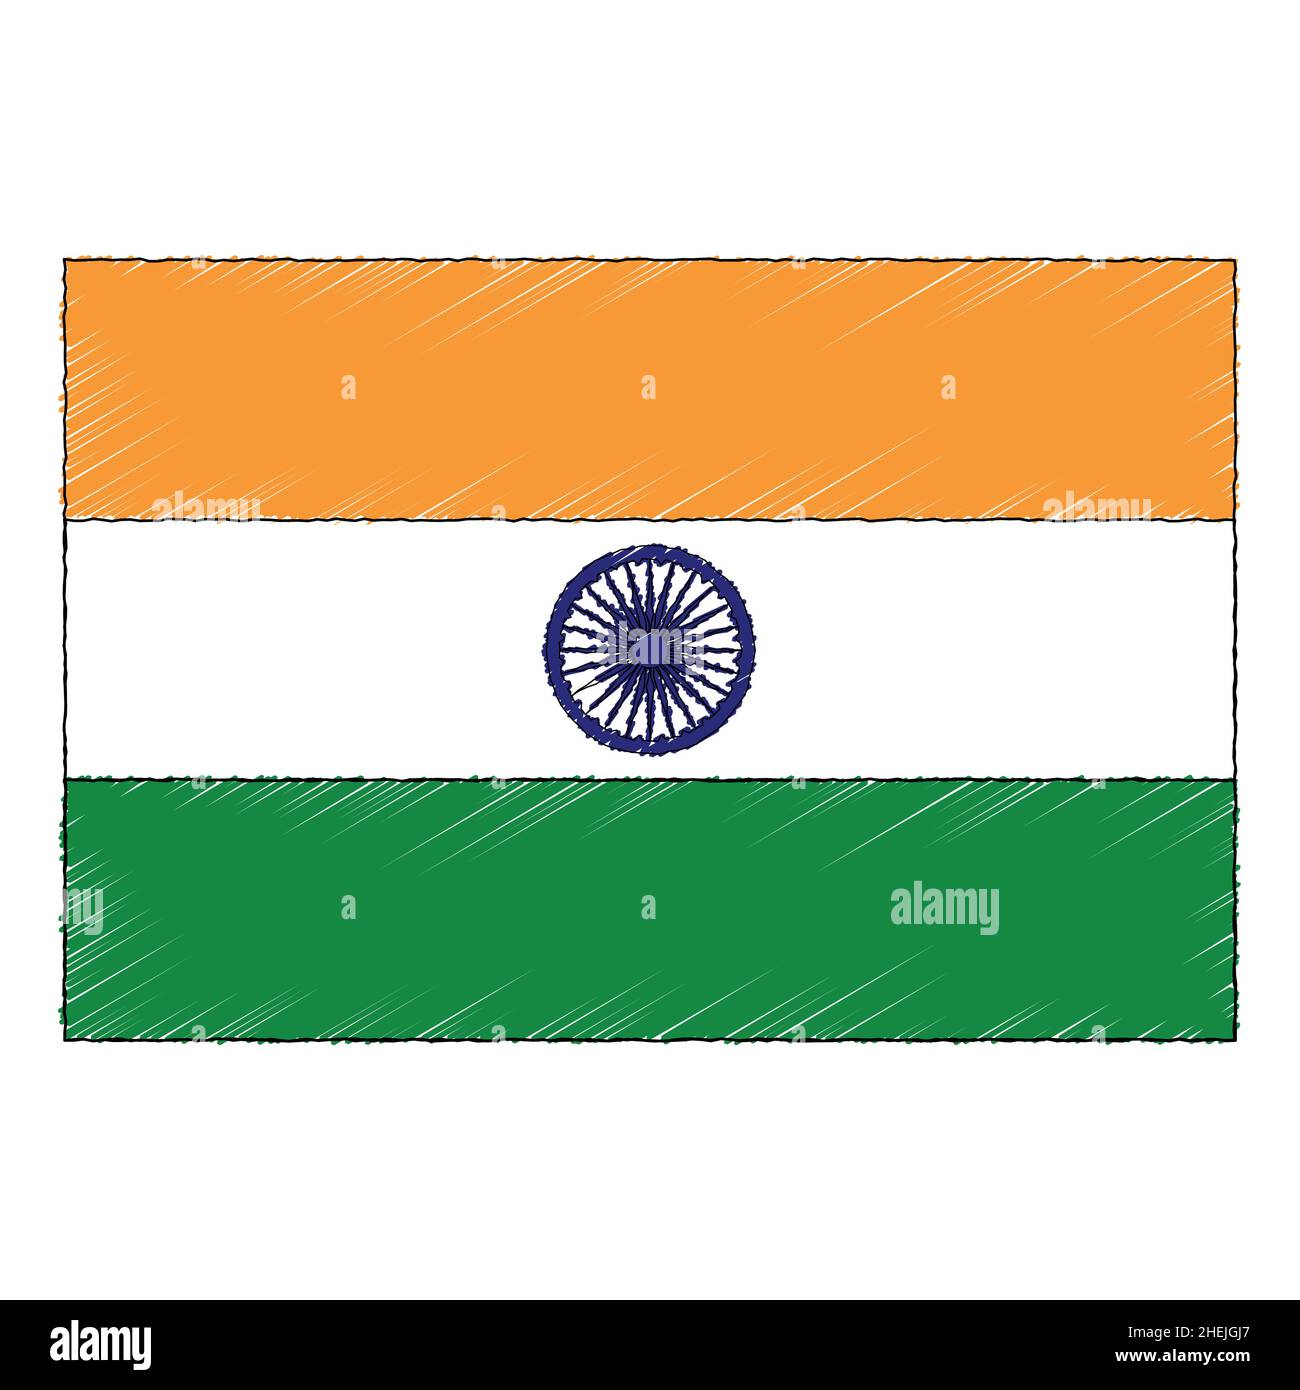 Grunge Brush Stroke With National Flag Of India Isolated On A White  Background. Vector Illustration. Stock Vector by ©nbargan.mail.ru 220240782